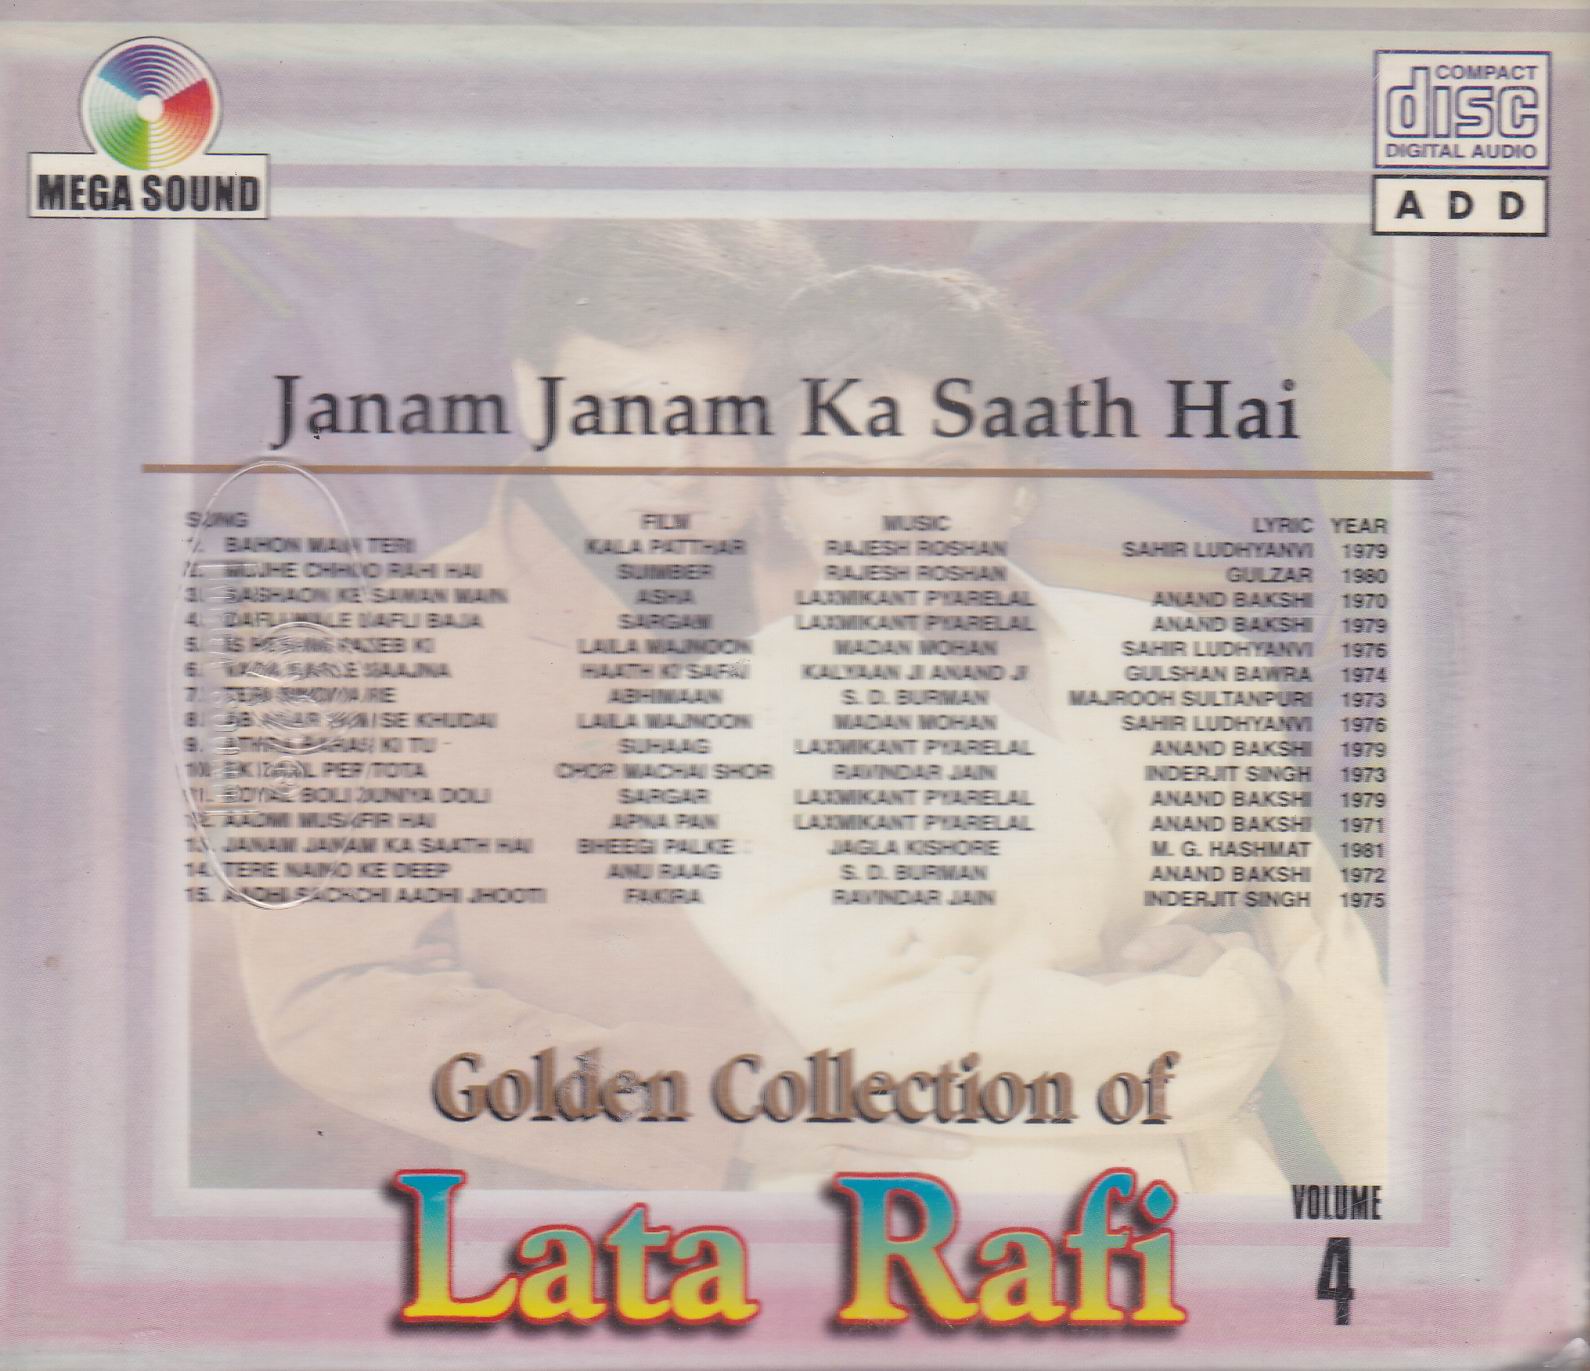 Golden Collection Of Lata Rafi Vol 4 MS CD Superb Recording - Click Image to Close